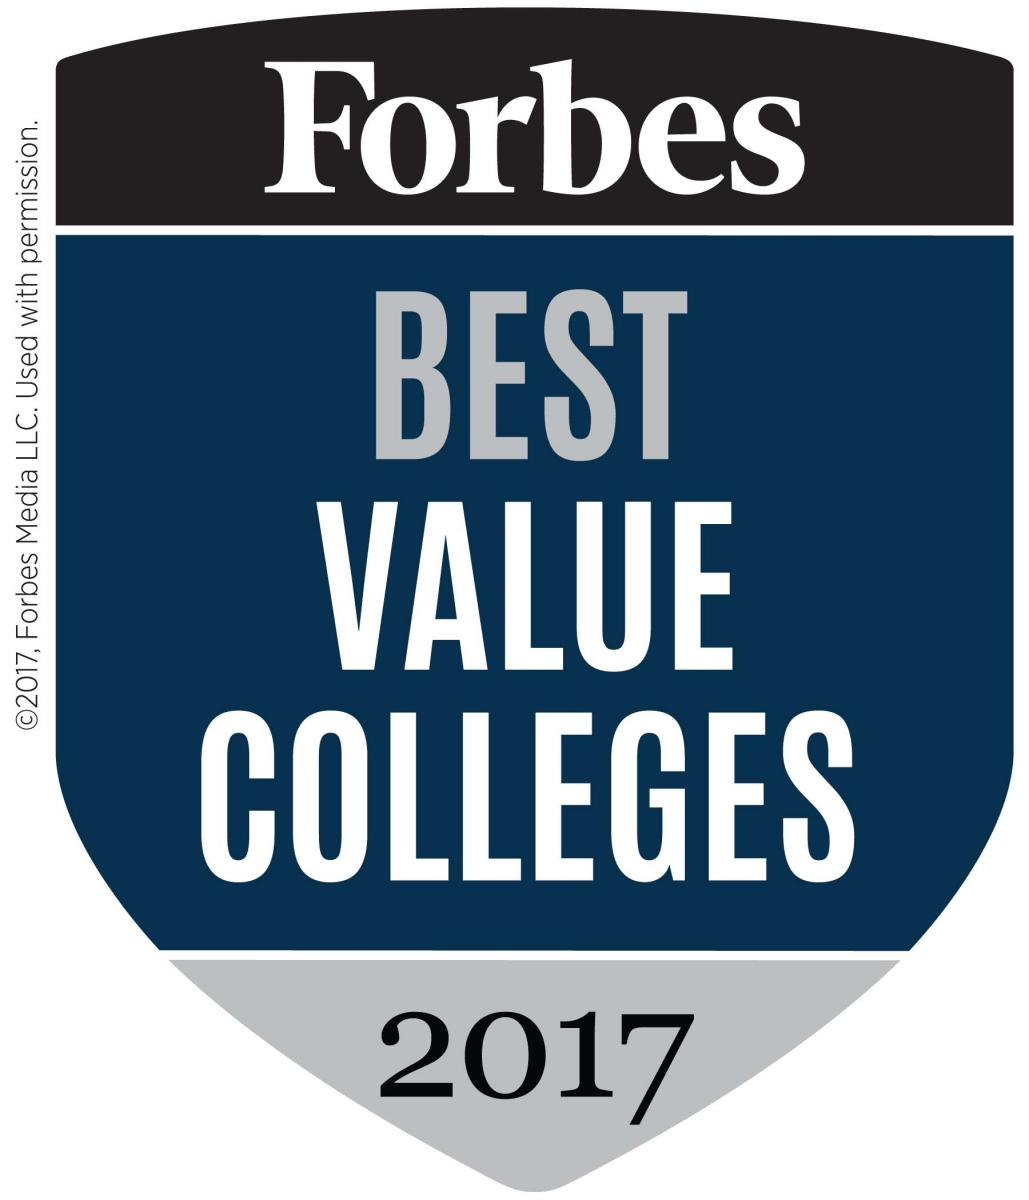 Forbes Best Value College 2017